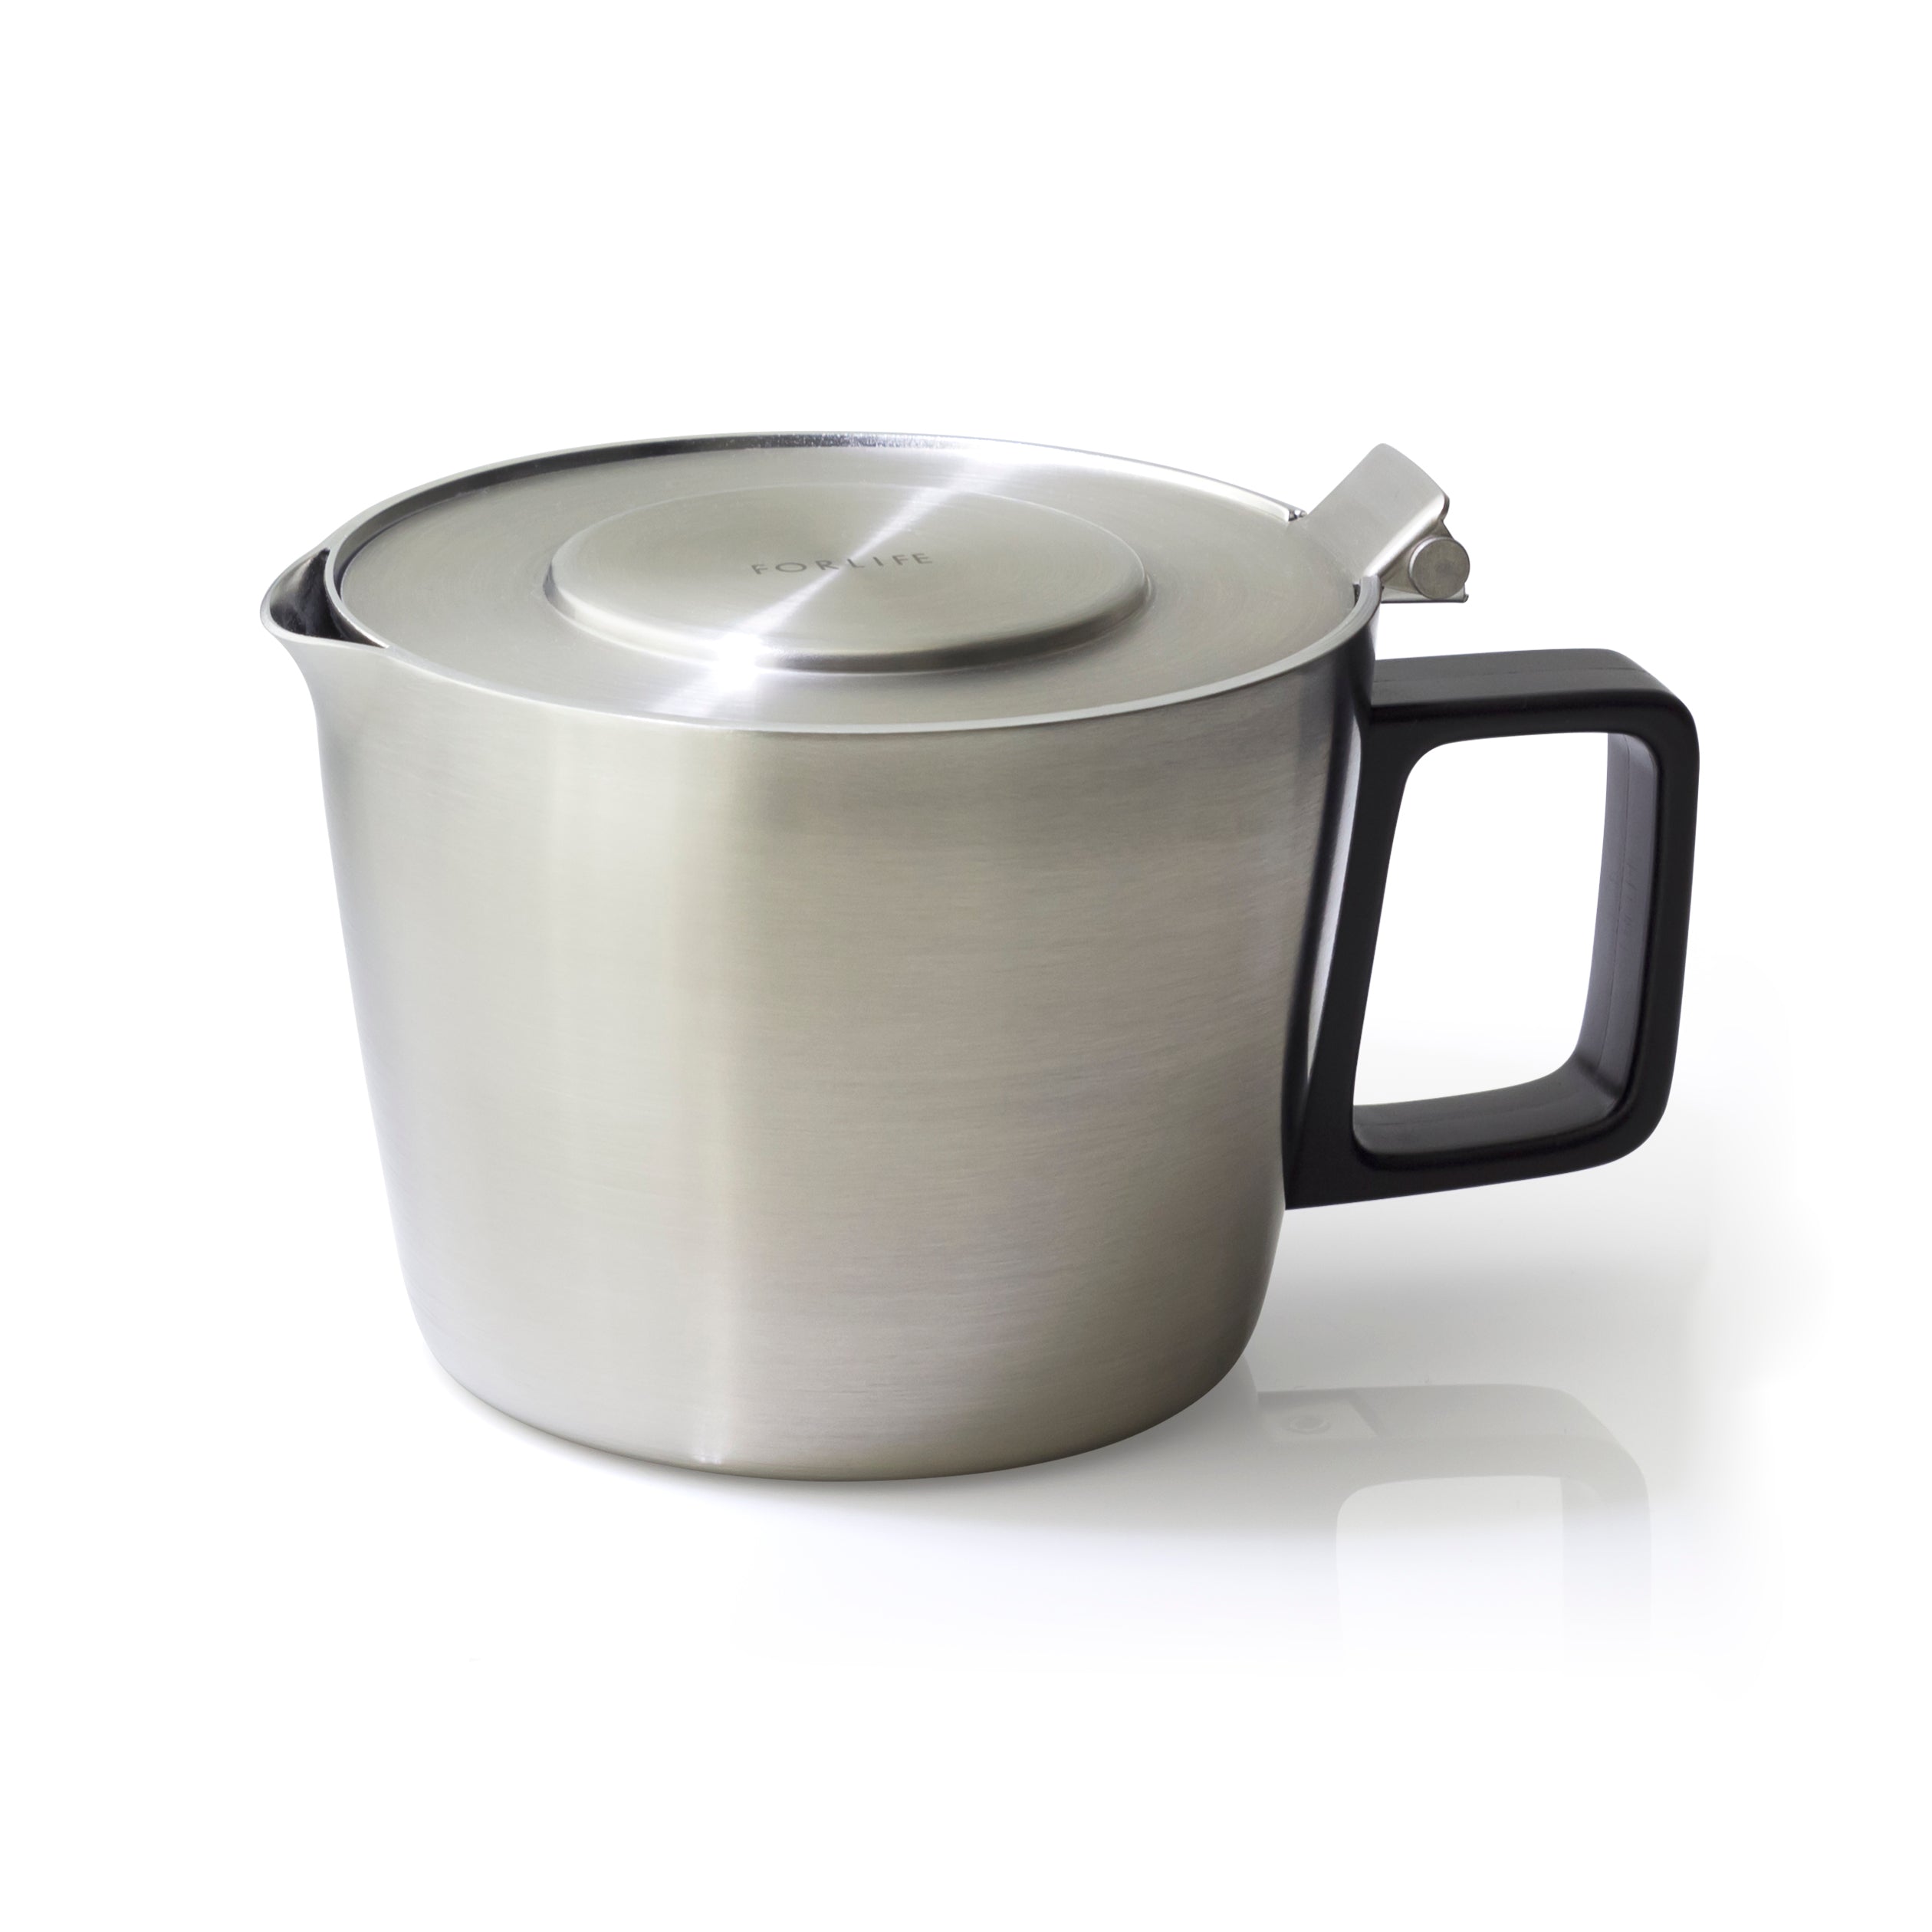 Stainless Steel Tea Kettle with Strainer (Variety Sizes) - Holy Land Grocery